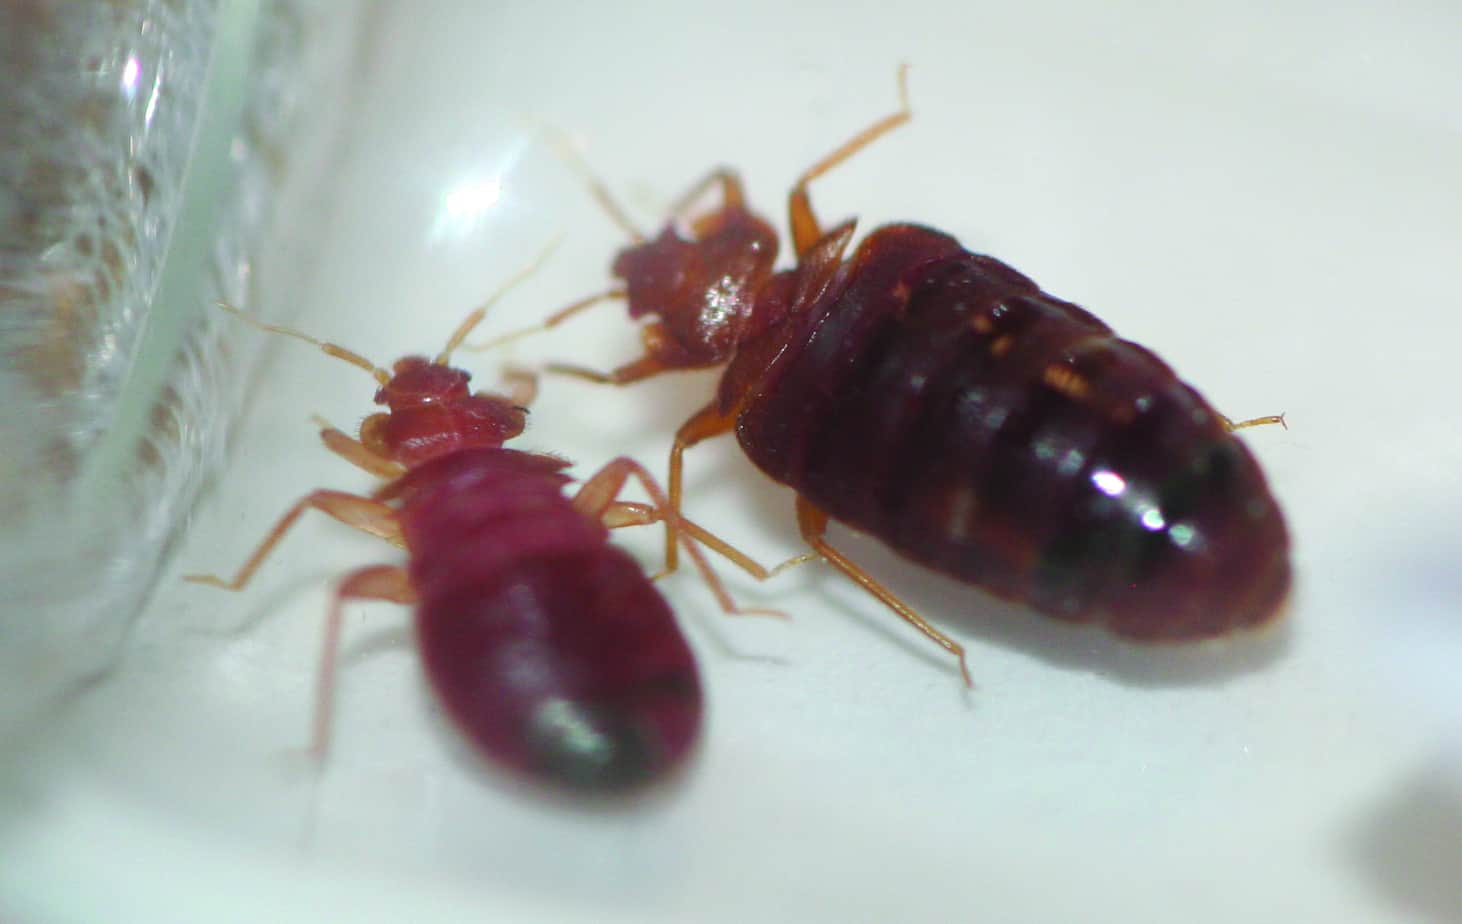 What do Bed Bugs Look Like